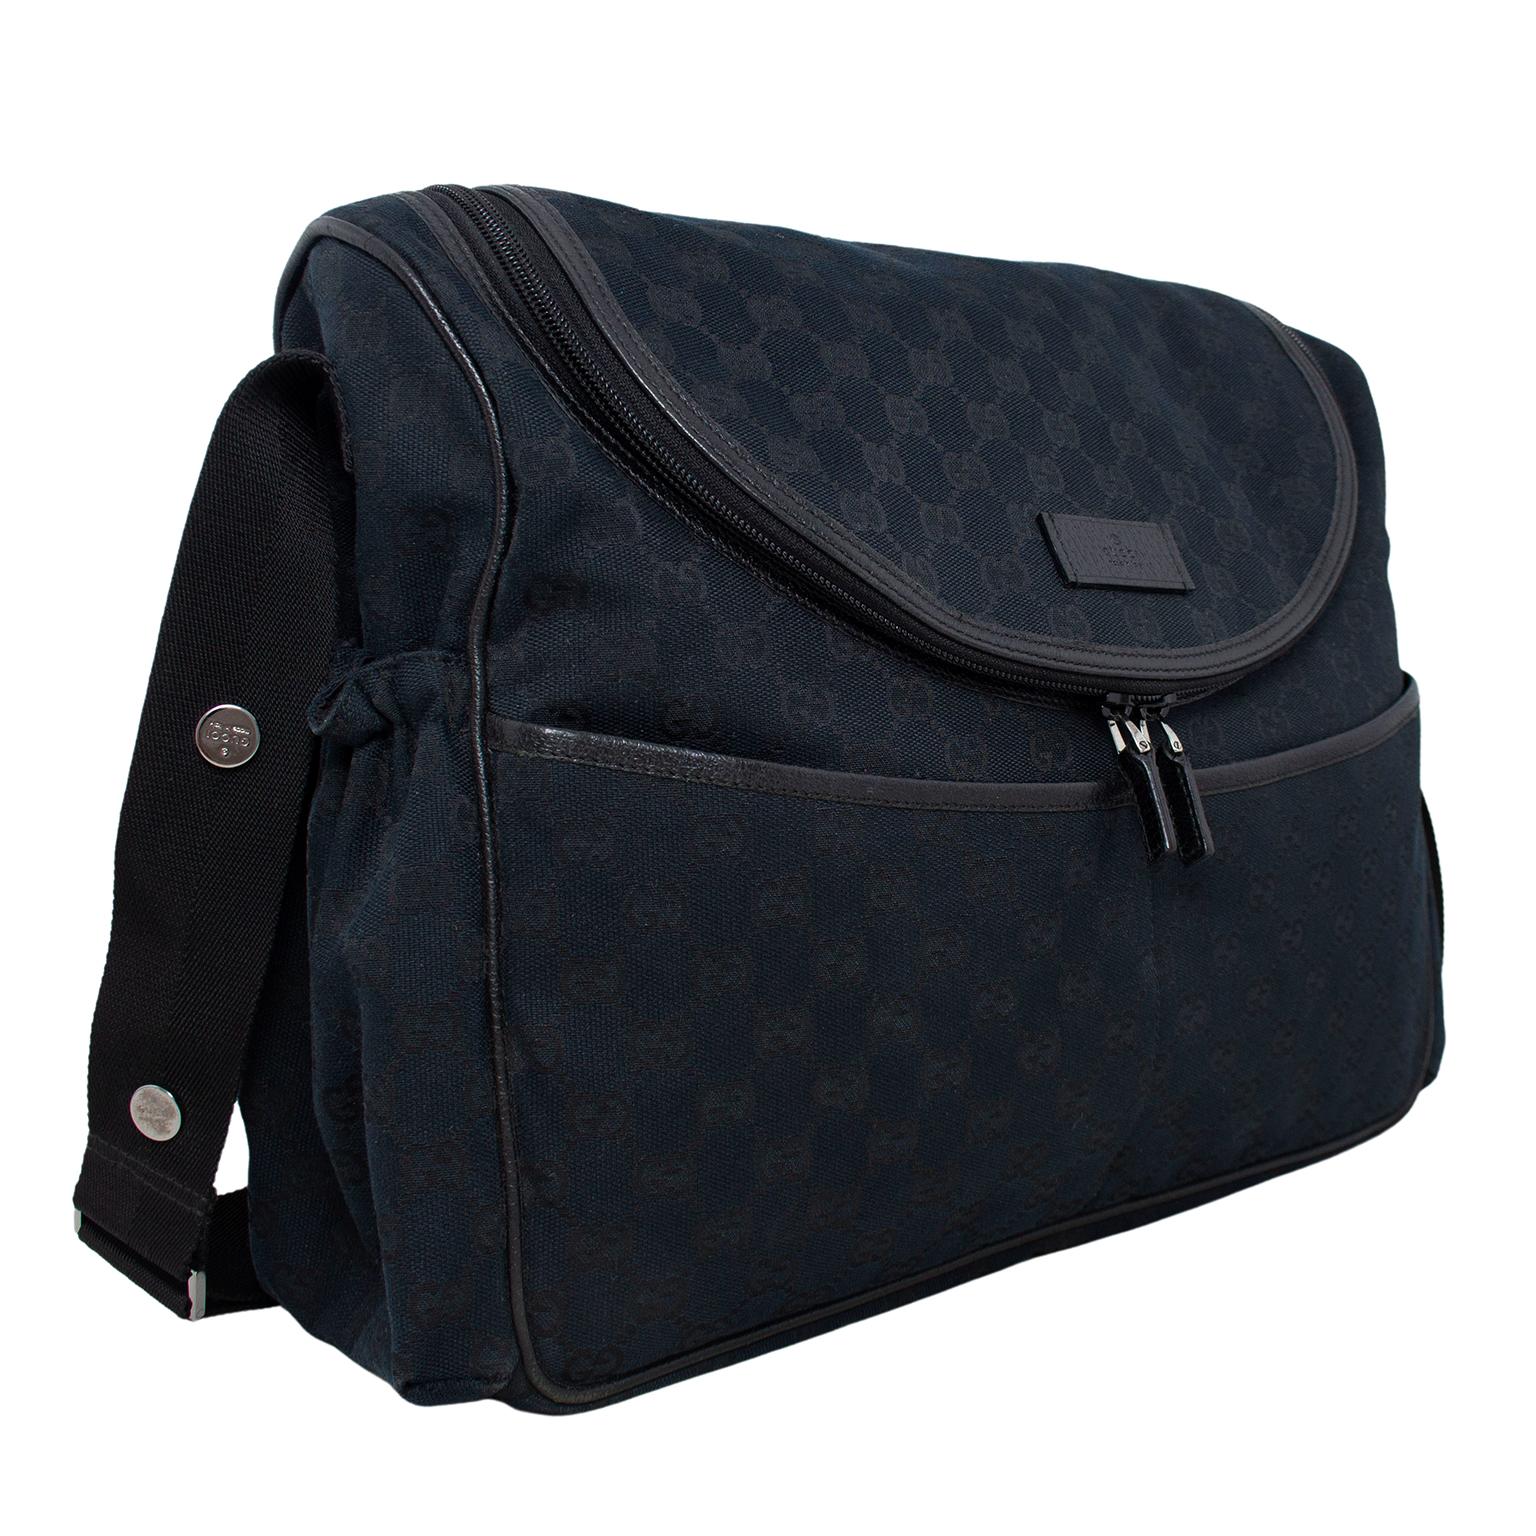 This Gucci diaper bag is the perfect mix of functional and chic. Black coated canvas with all over monochromatic Gucci logos and black leather trim. Exterior pockets on the front, back and sides for easy access to things that you need quickly.